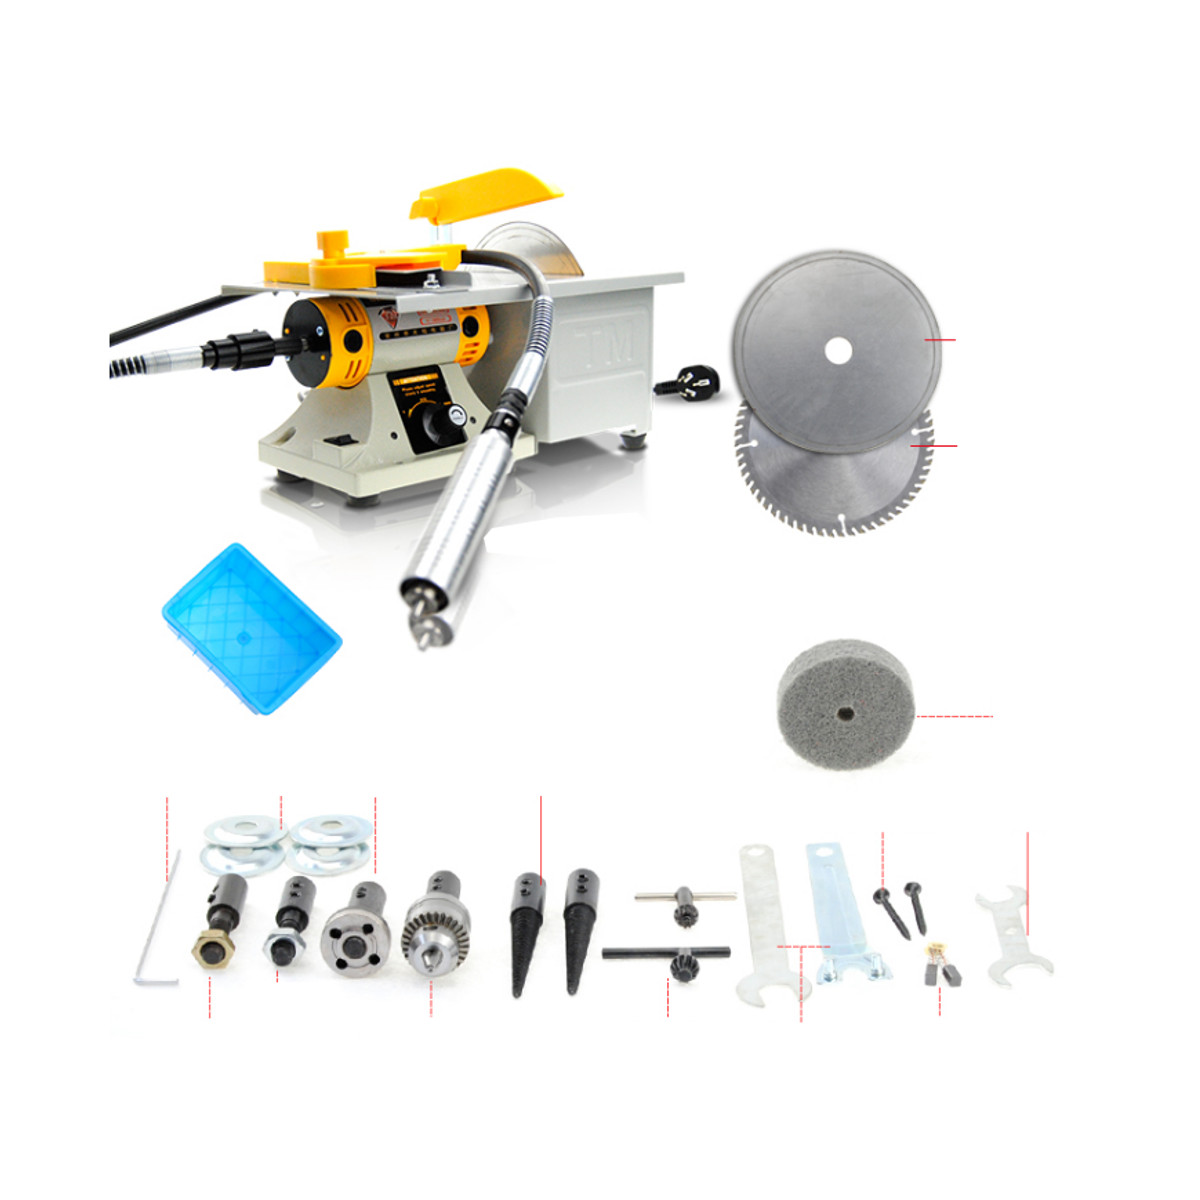 350W-Mini-Table-Bench-Saws-Woodworking-Bench-Lathe-Electric-Polisher-Grinder-Cutting-Saw-Power-Tools-1295975